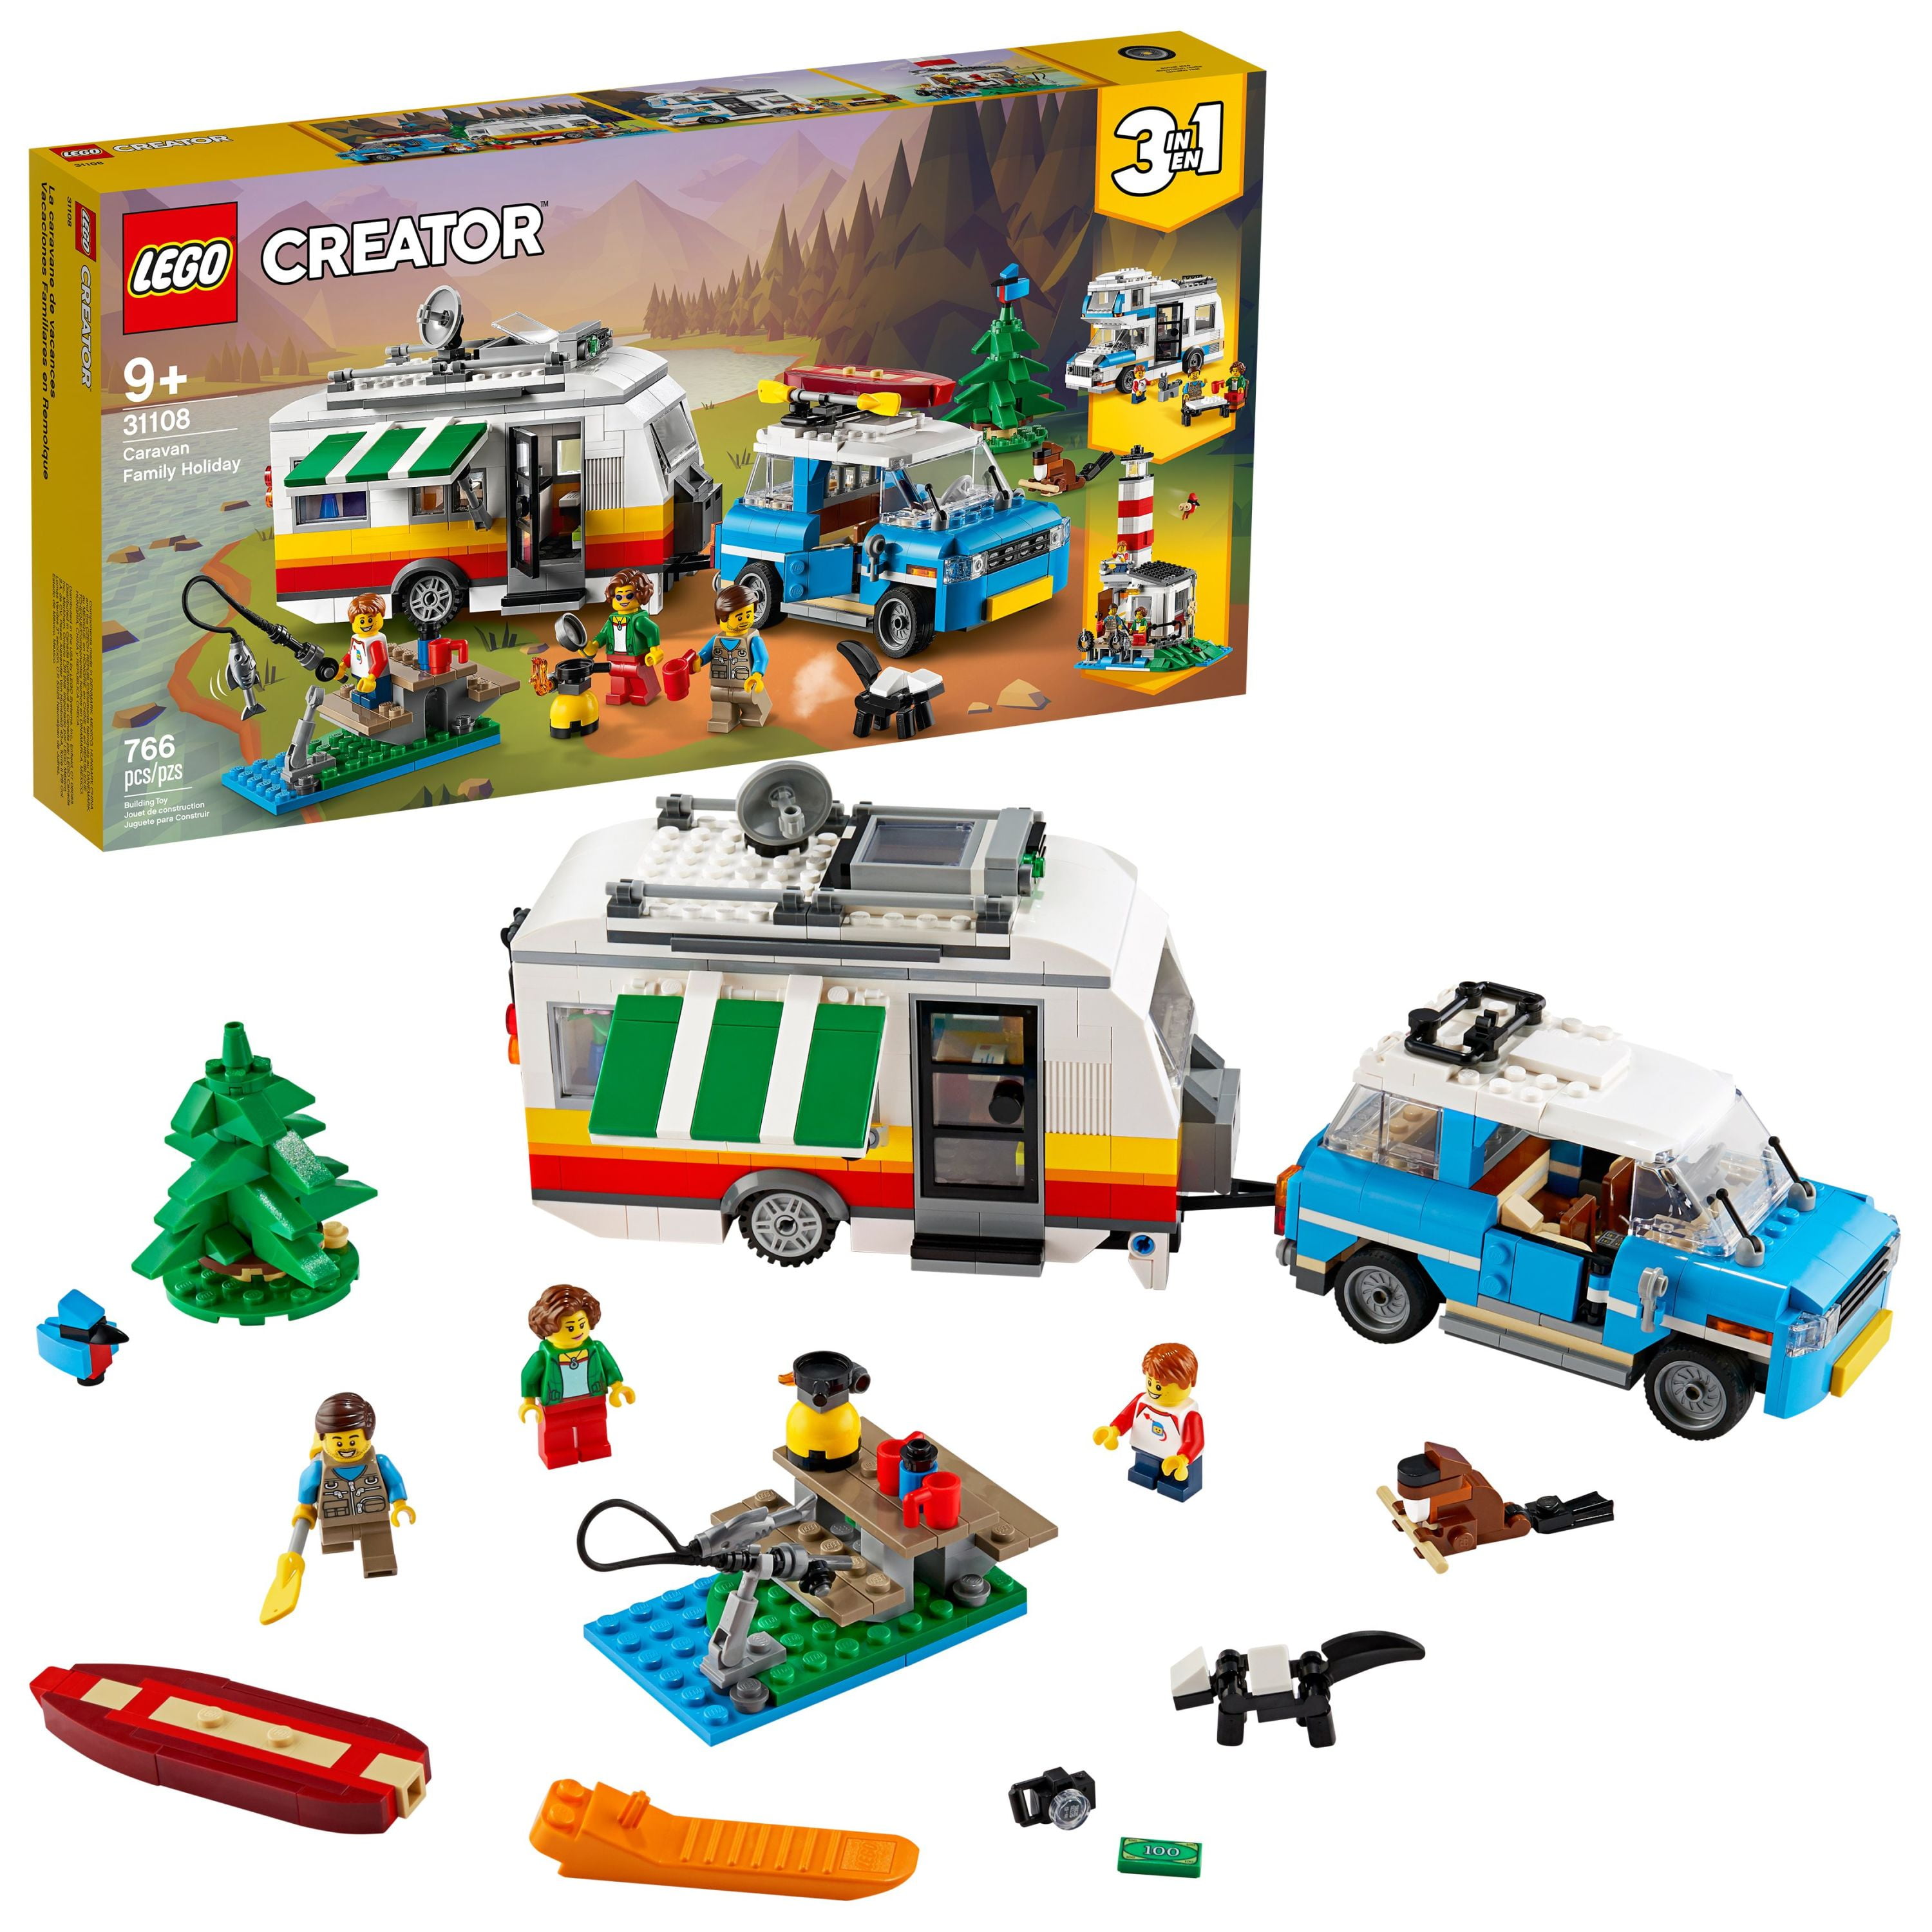 LEGO Creator 3in1 Family Holiday Creative Building Toy Set for Kids Ages 9+ (766 Pieces) - Walmart.com